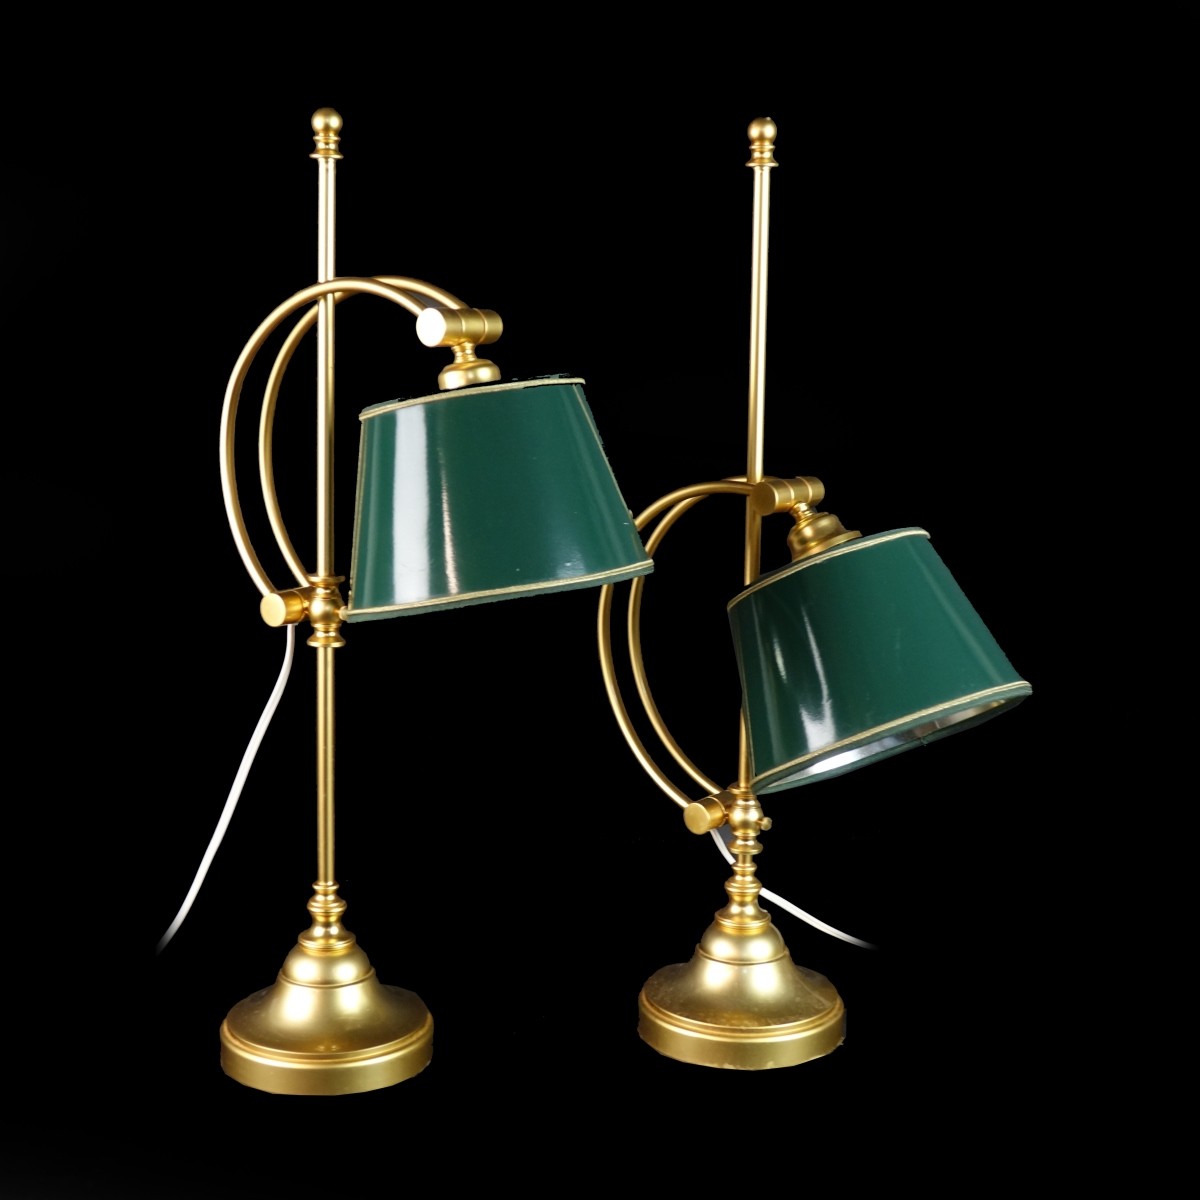 Pair of 20th C. Student Lamps